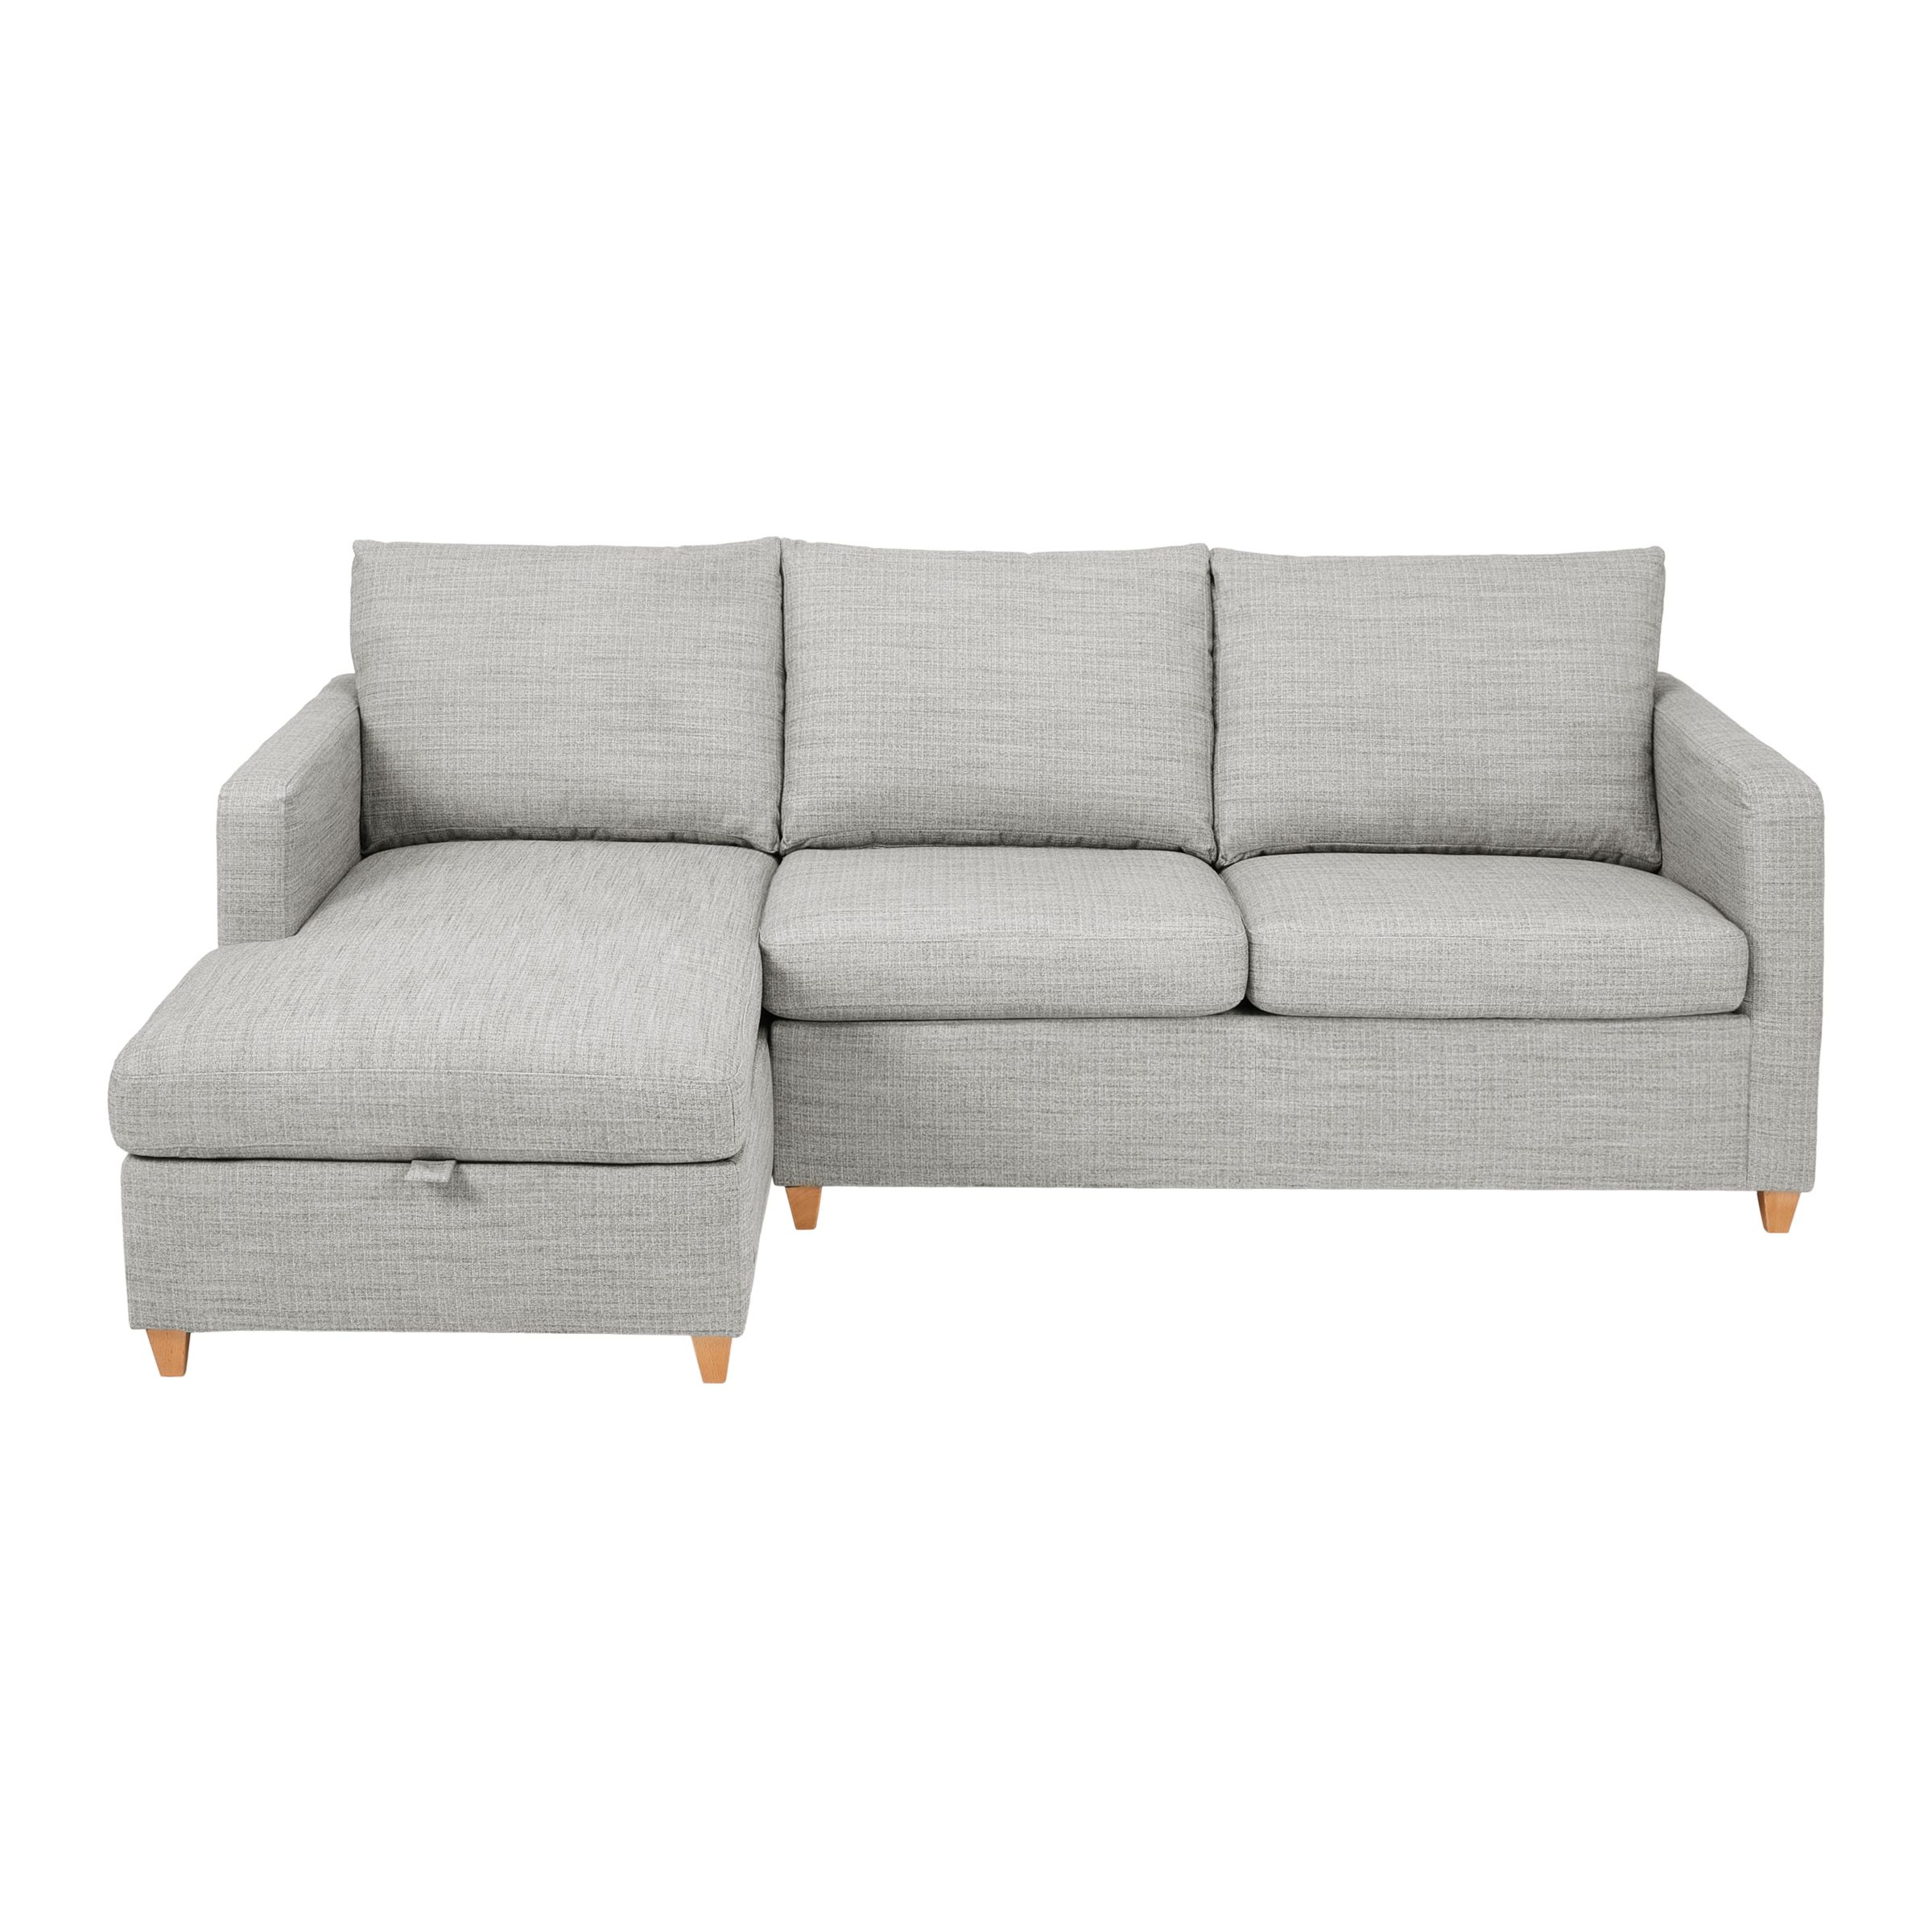 Photo of John lewis bailey 5+ seater lhf chaise end sofa bed